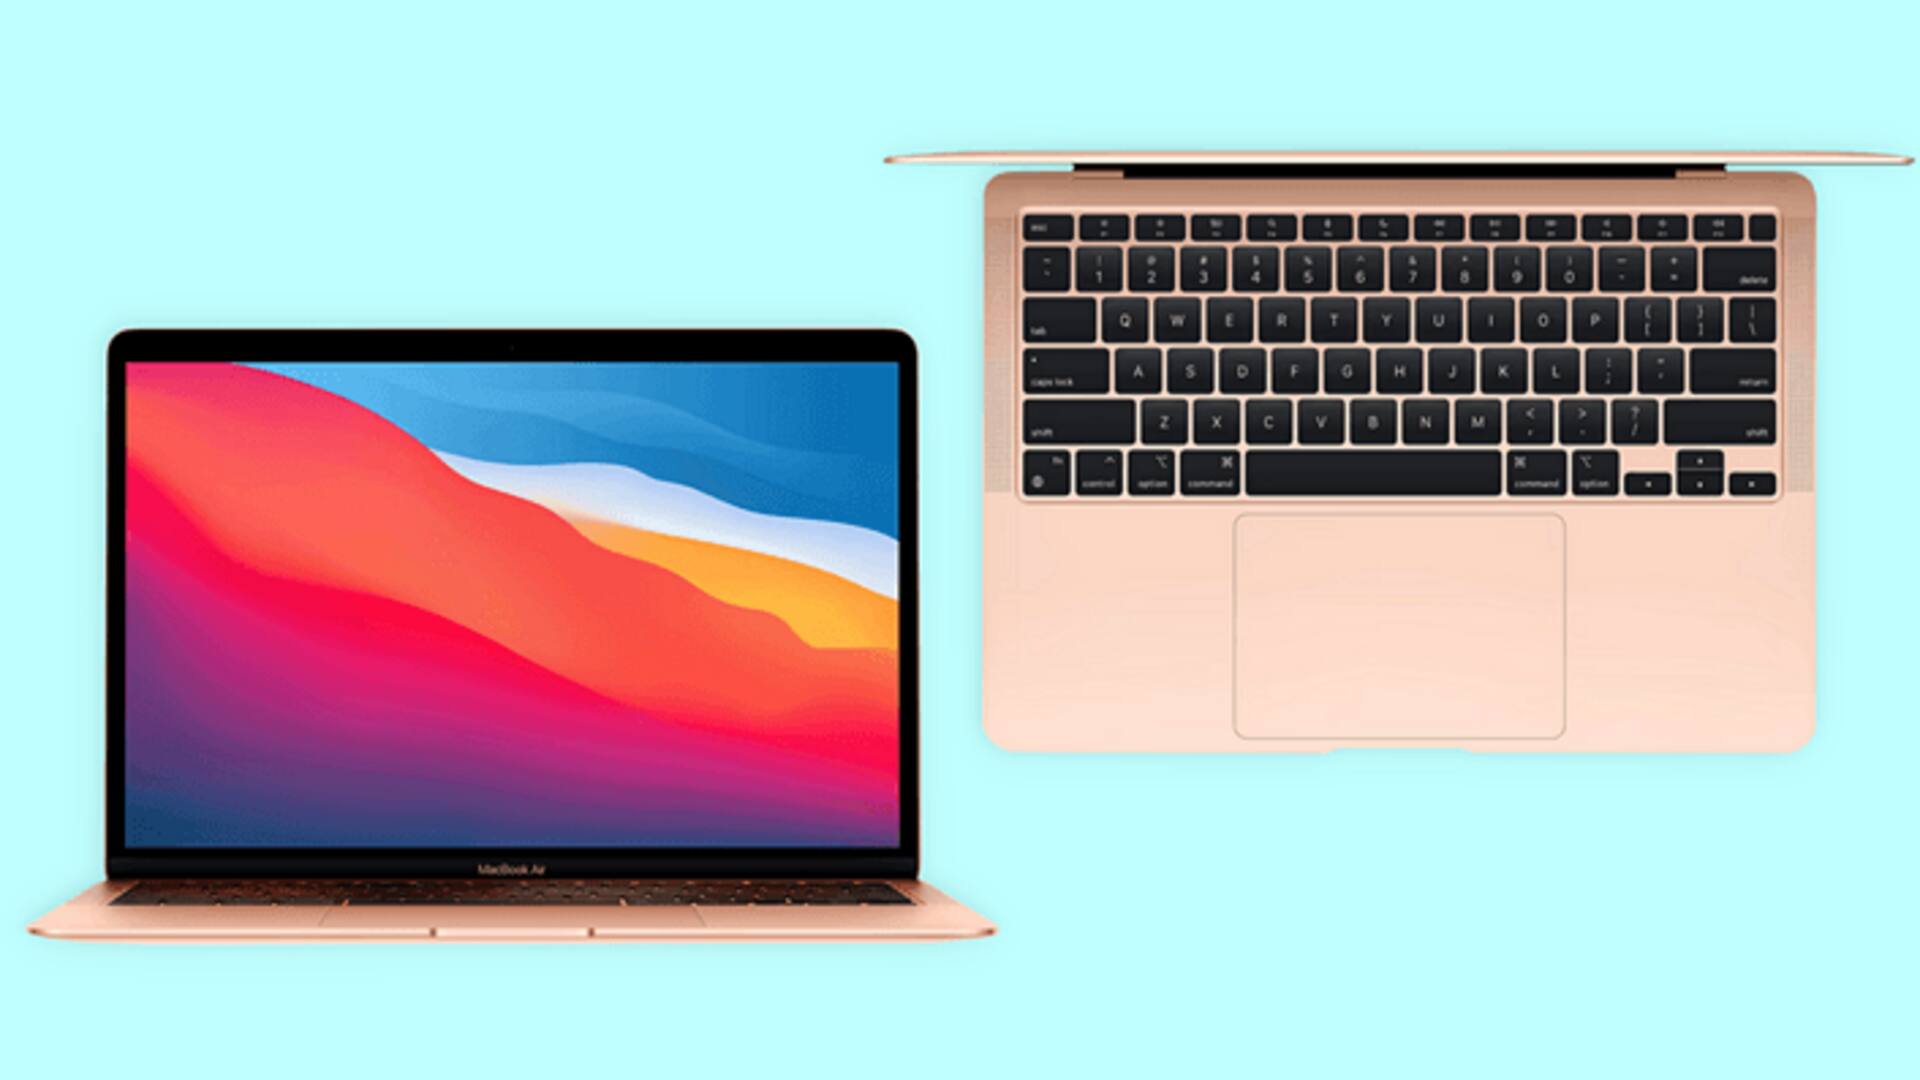 Amazon sale: MacBook Air M1 to sell for Rs. 53,000